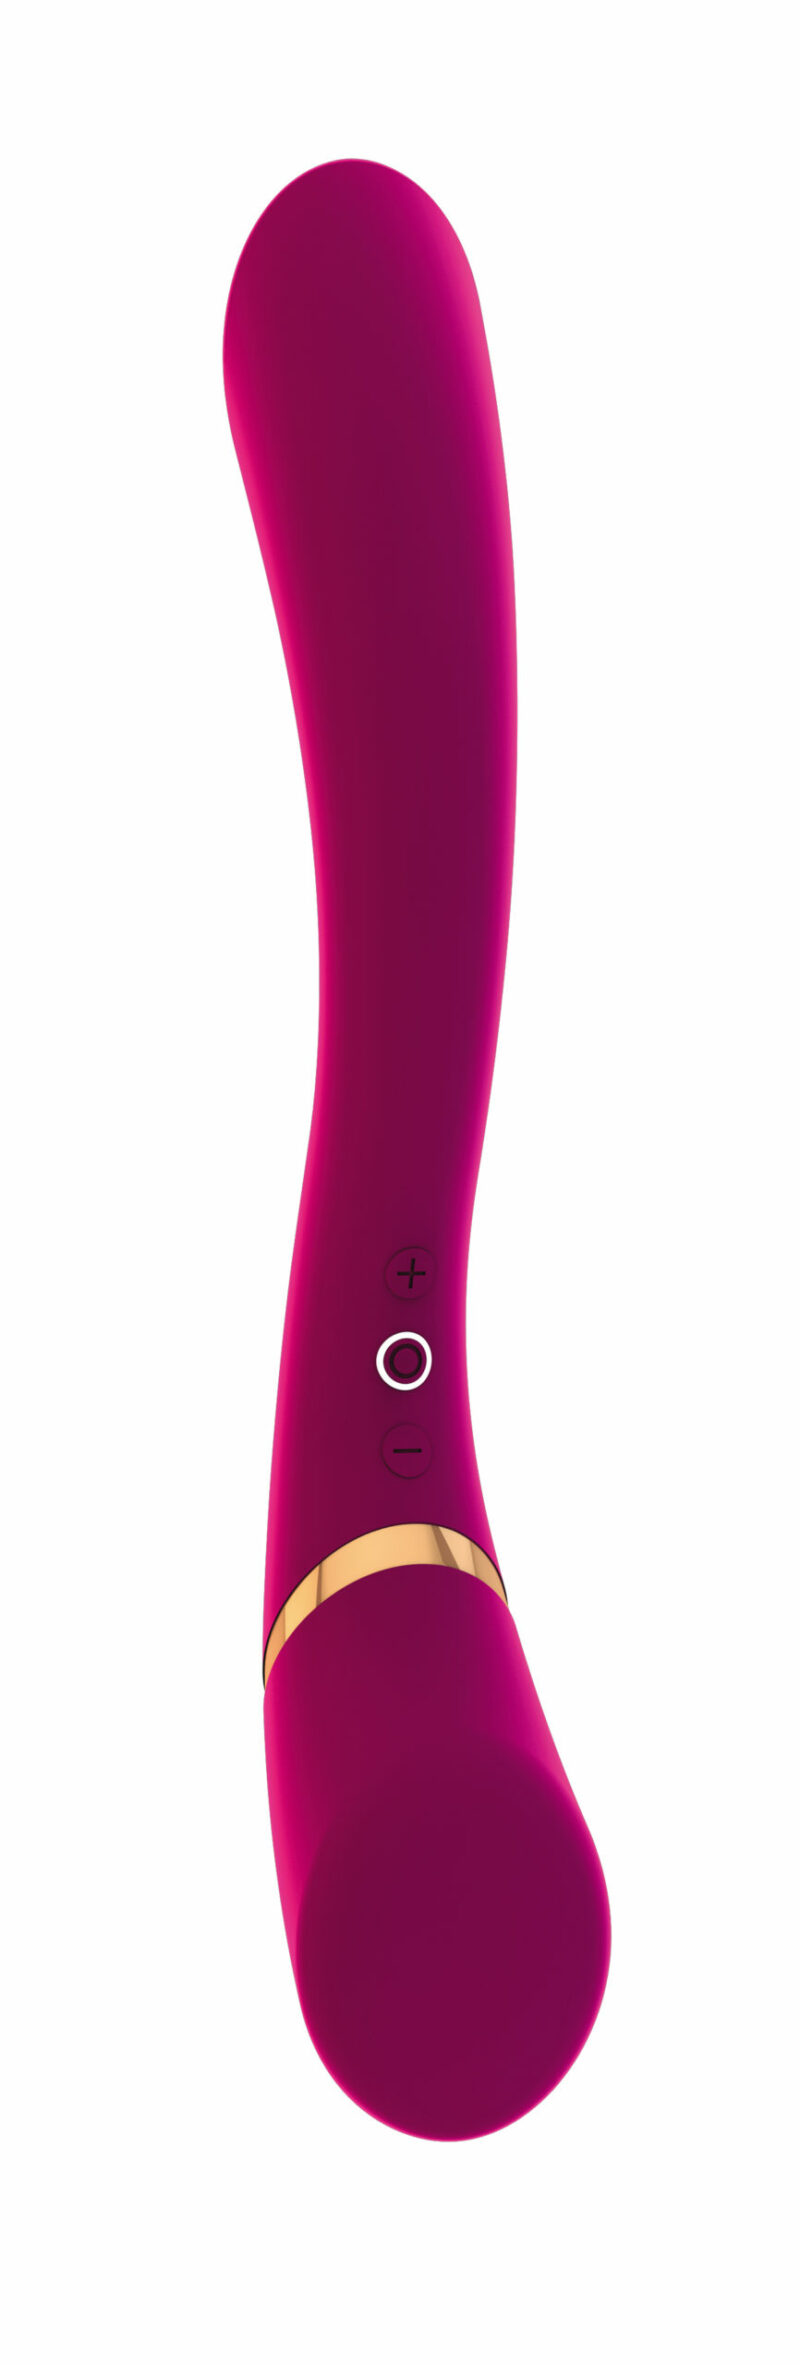 VIVE Cleo Rechargeable Silicone Vibrator